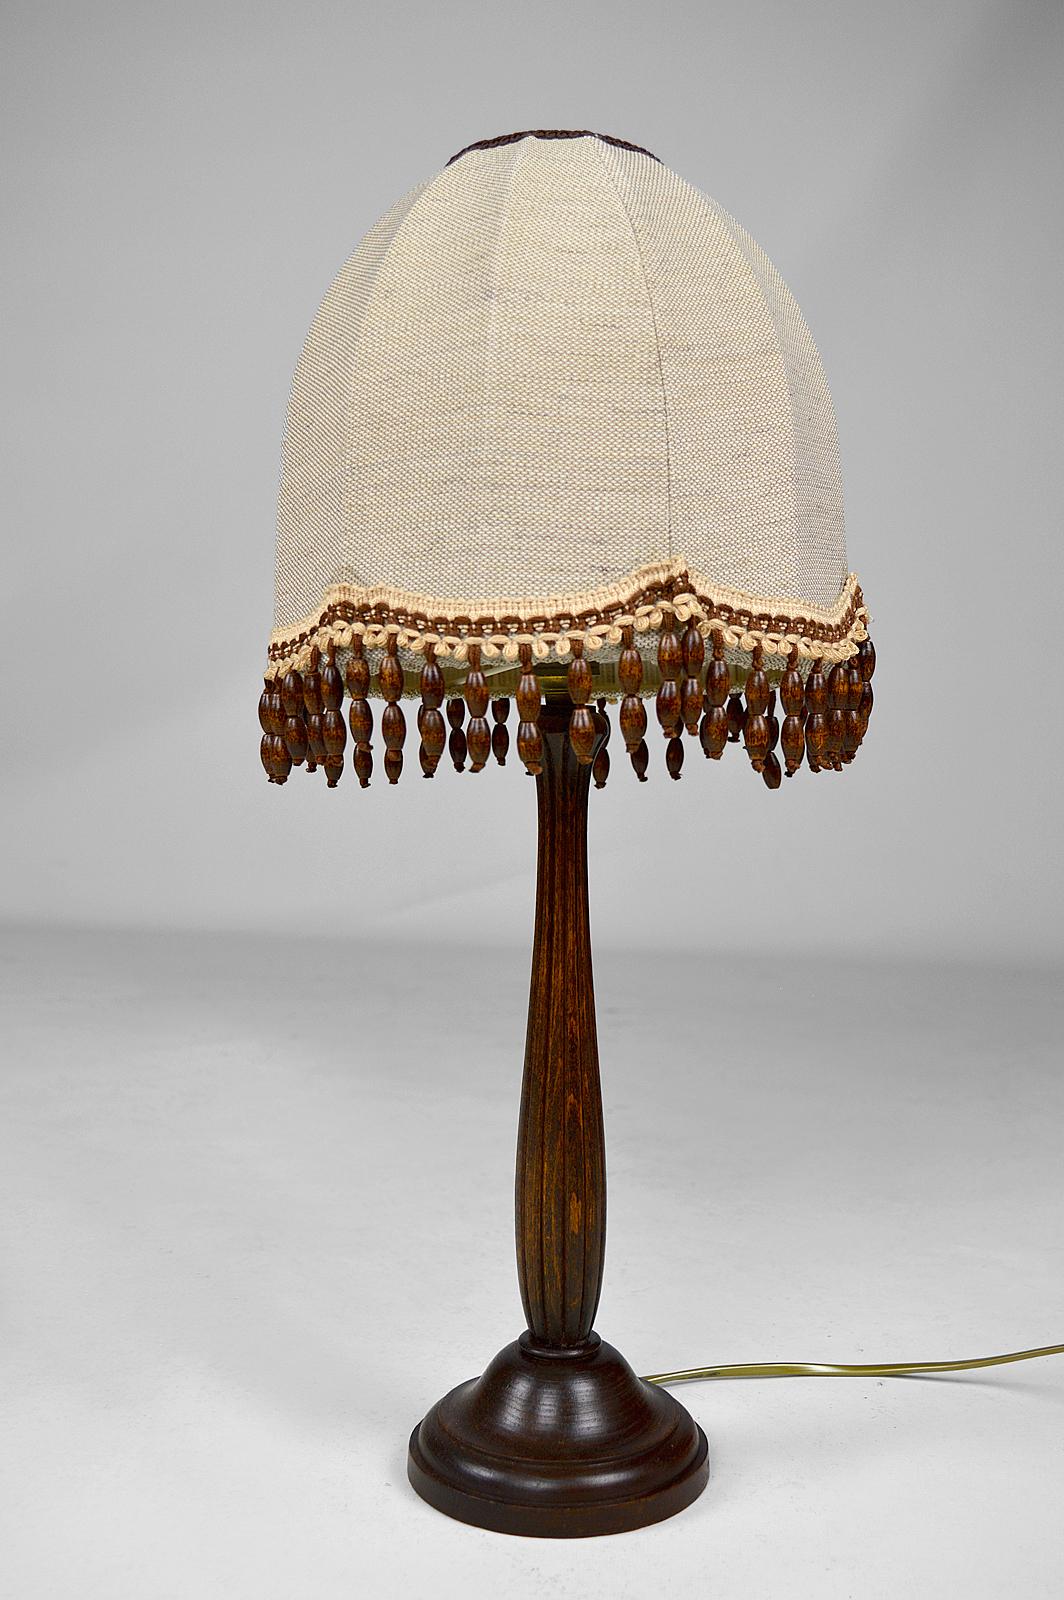 Beautiful lamp with its fringed lampshade and sculpted fluted beech base.

Art Deco, France, circa 1925.
In the style of the productions of Paul Follot, Maurice Dufrène.

In good condition, restored, electricity redone.

Foot dimensions: height 36